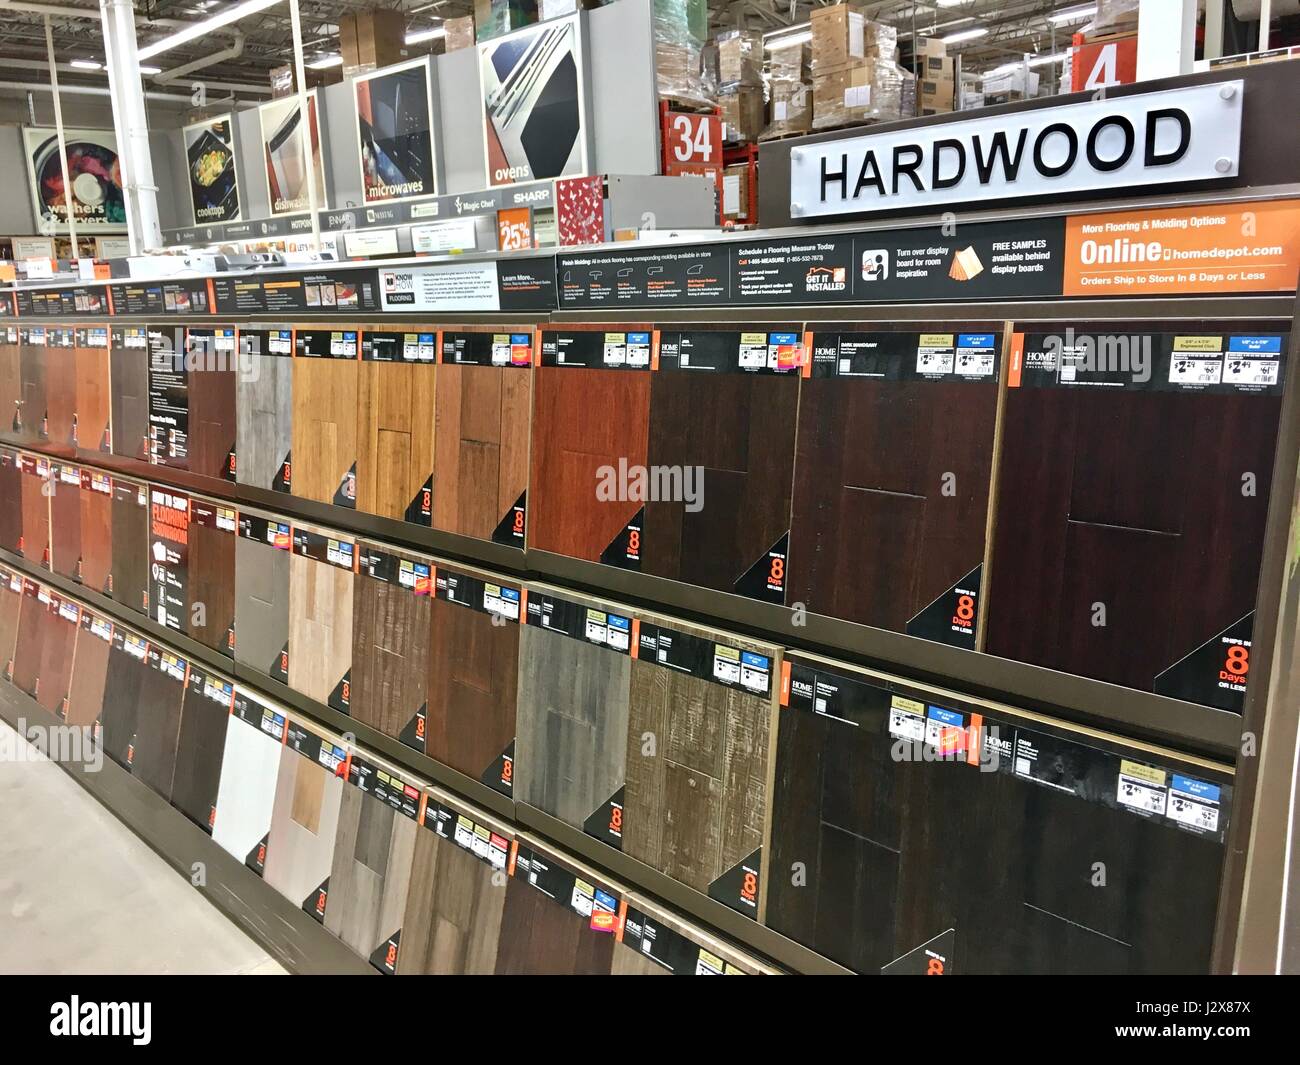 Hardwood floor selection at The Home Depot Stock Photo